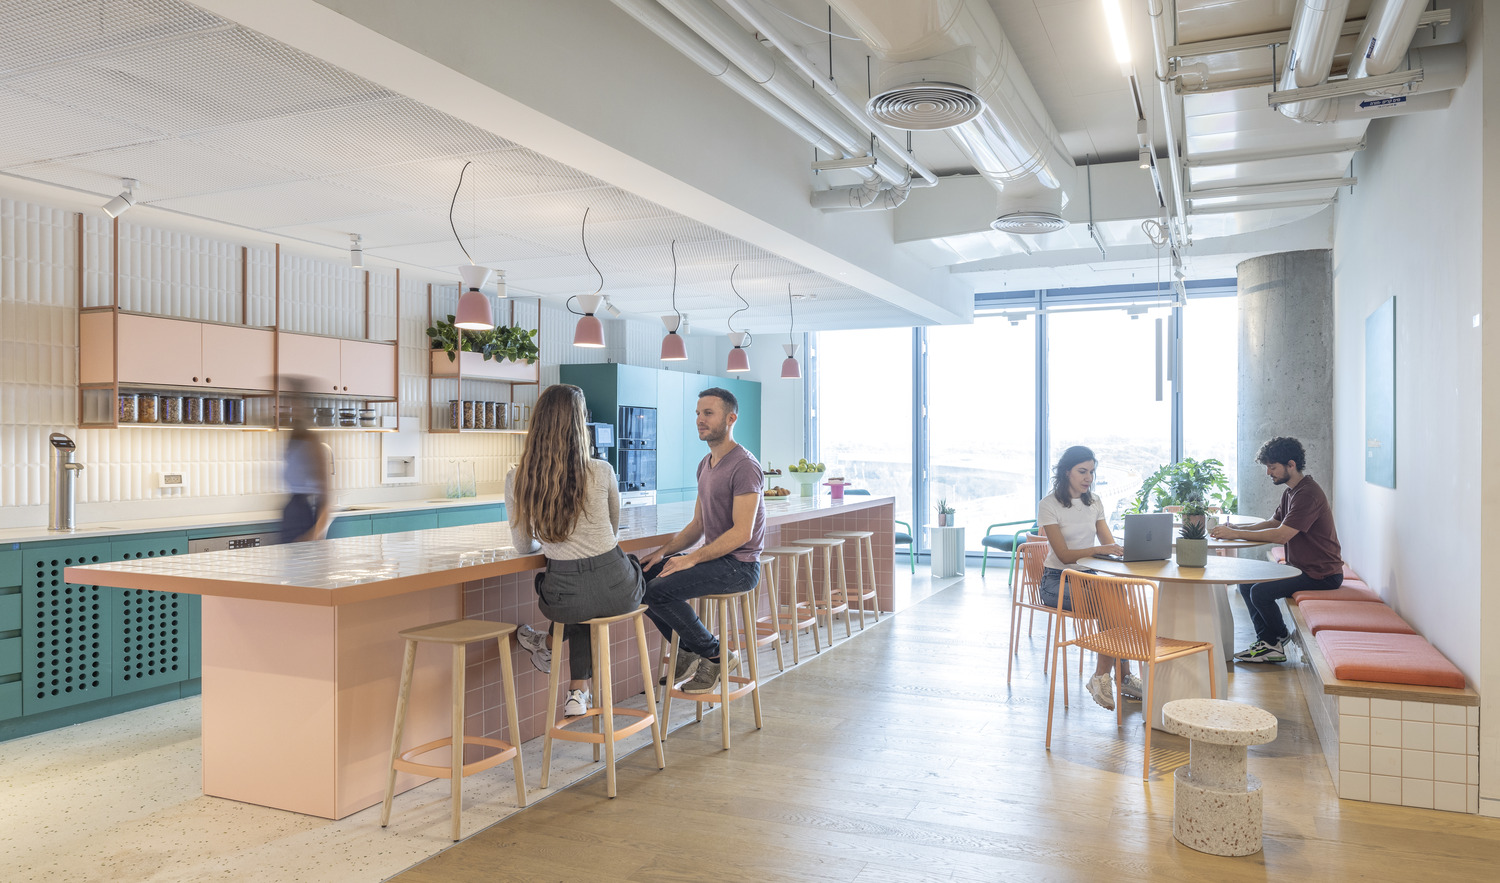 Modern and airy office kitchen and break area with pastel pink and teal cabinetry, terrazzo countertops, and pendant lighting. People engage casually around the bar seating and work at a window-side communal table, highlighting a collaborative atmosphere.